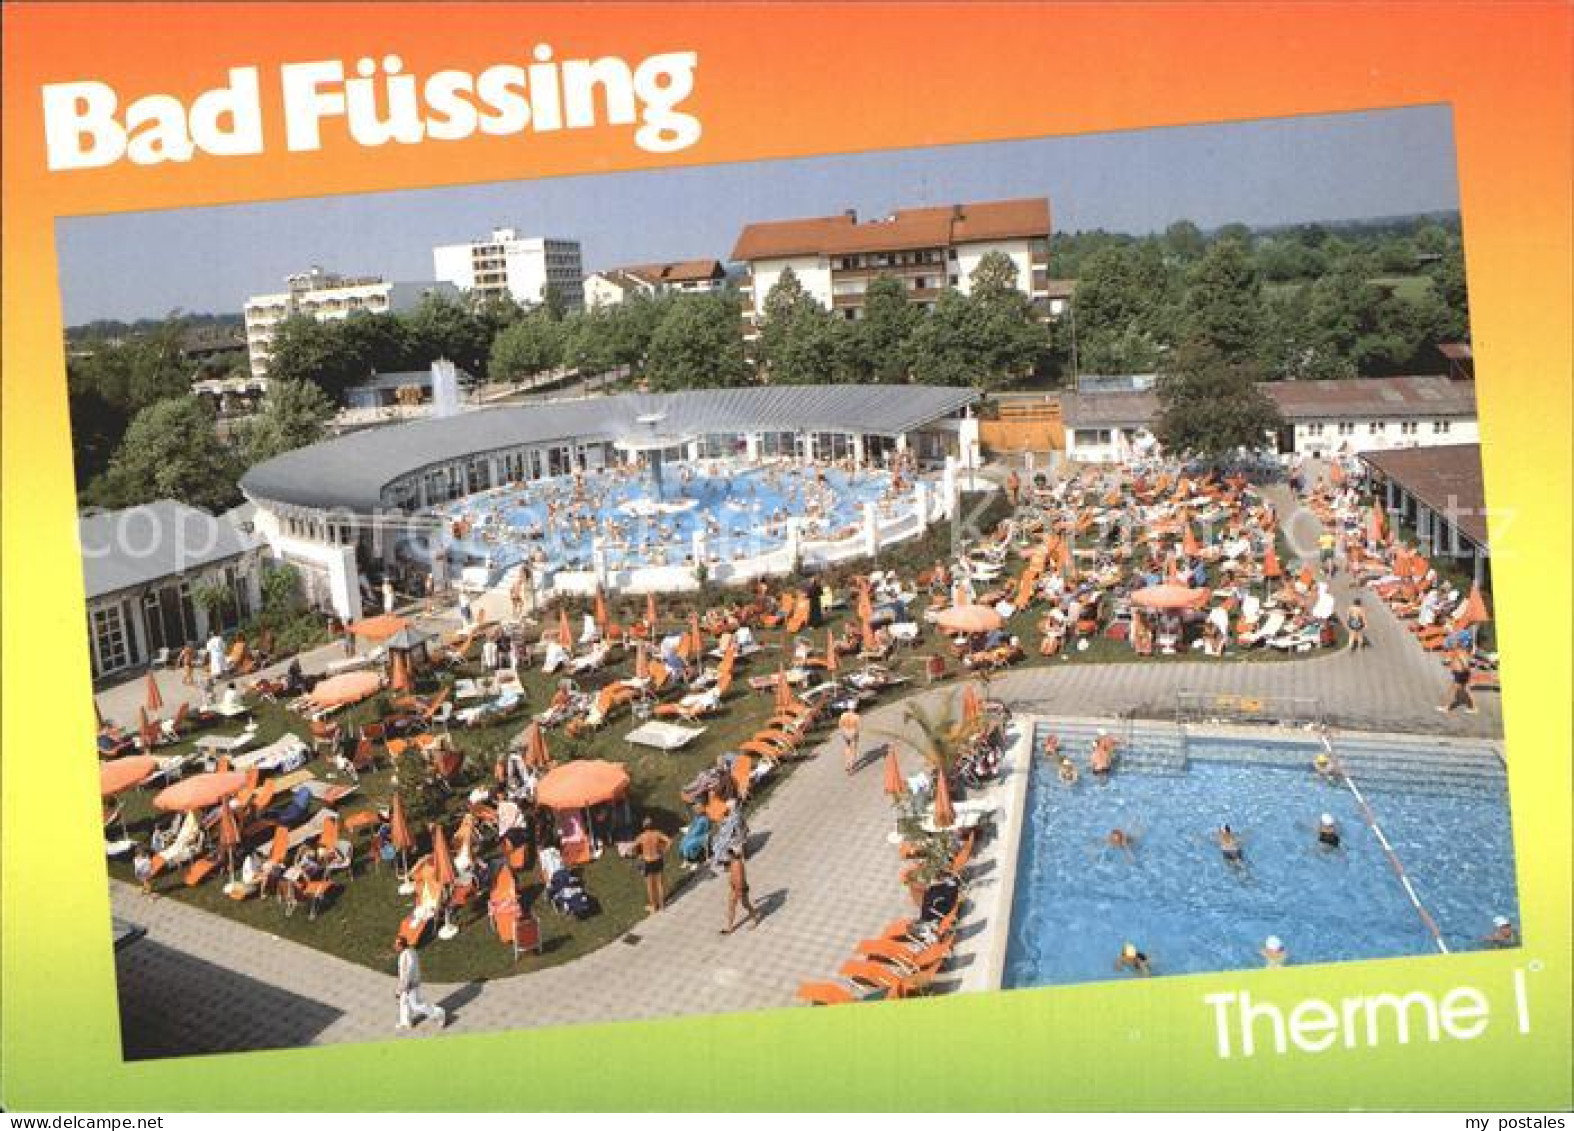 72369488 Fuessing Bad Therme I Mineral Heilquelle Bad Fuessing - Bad Fuessing